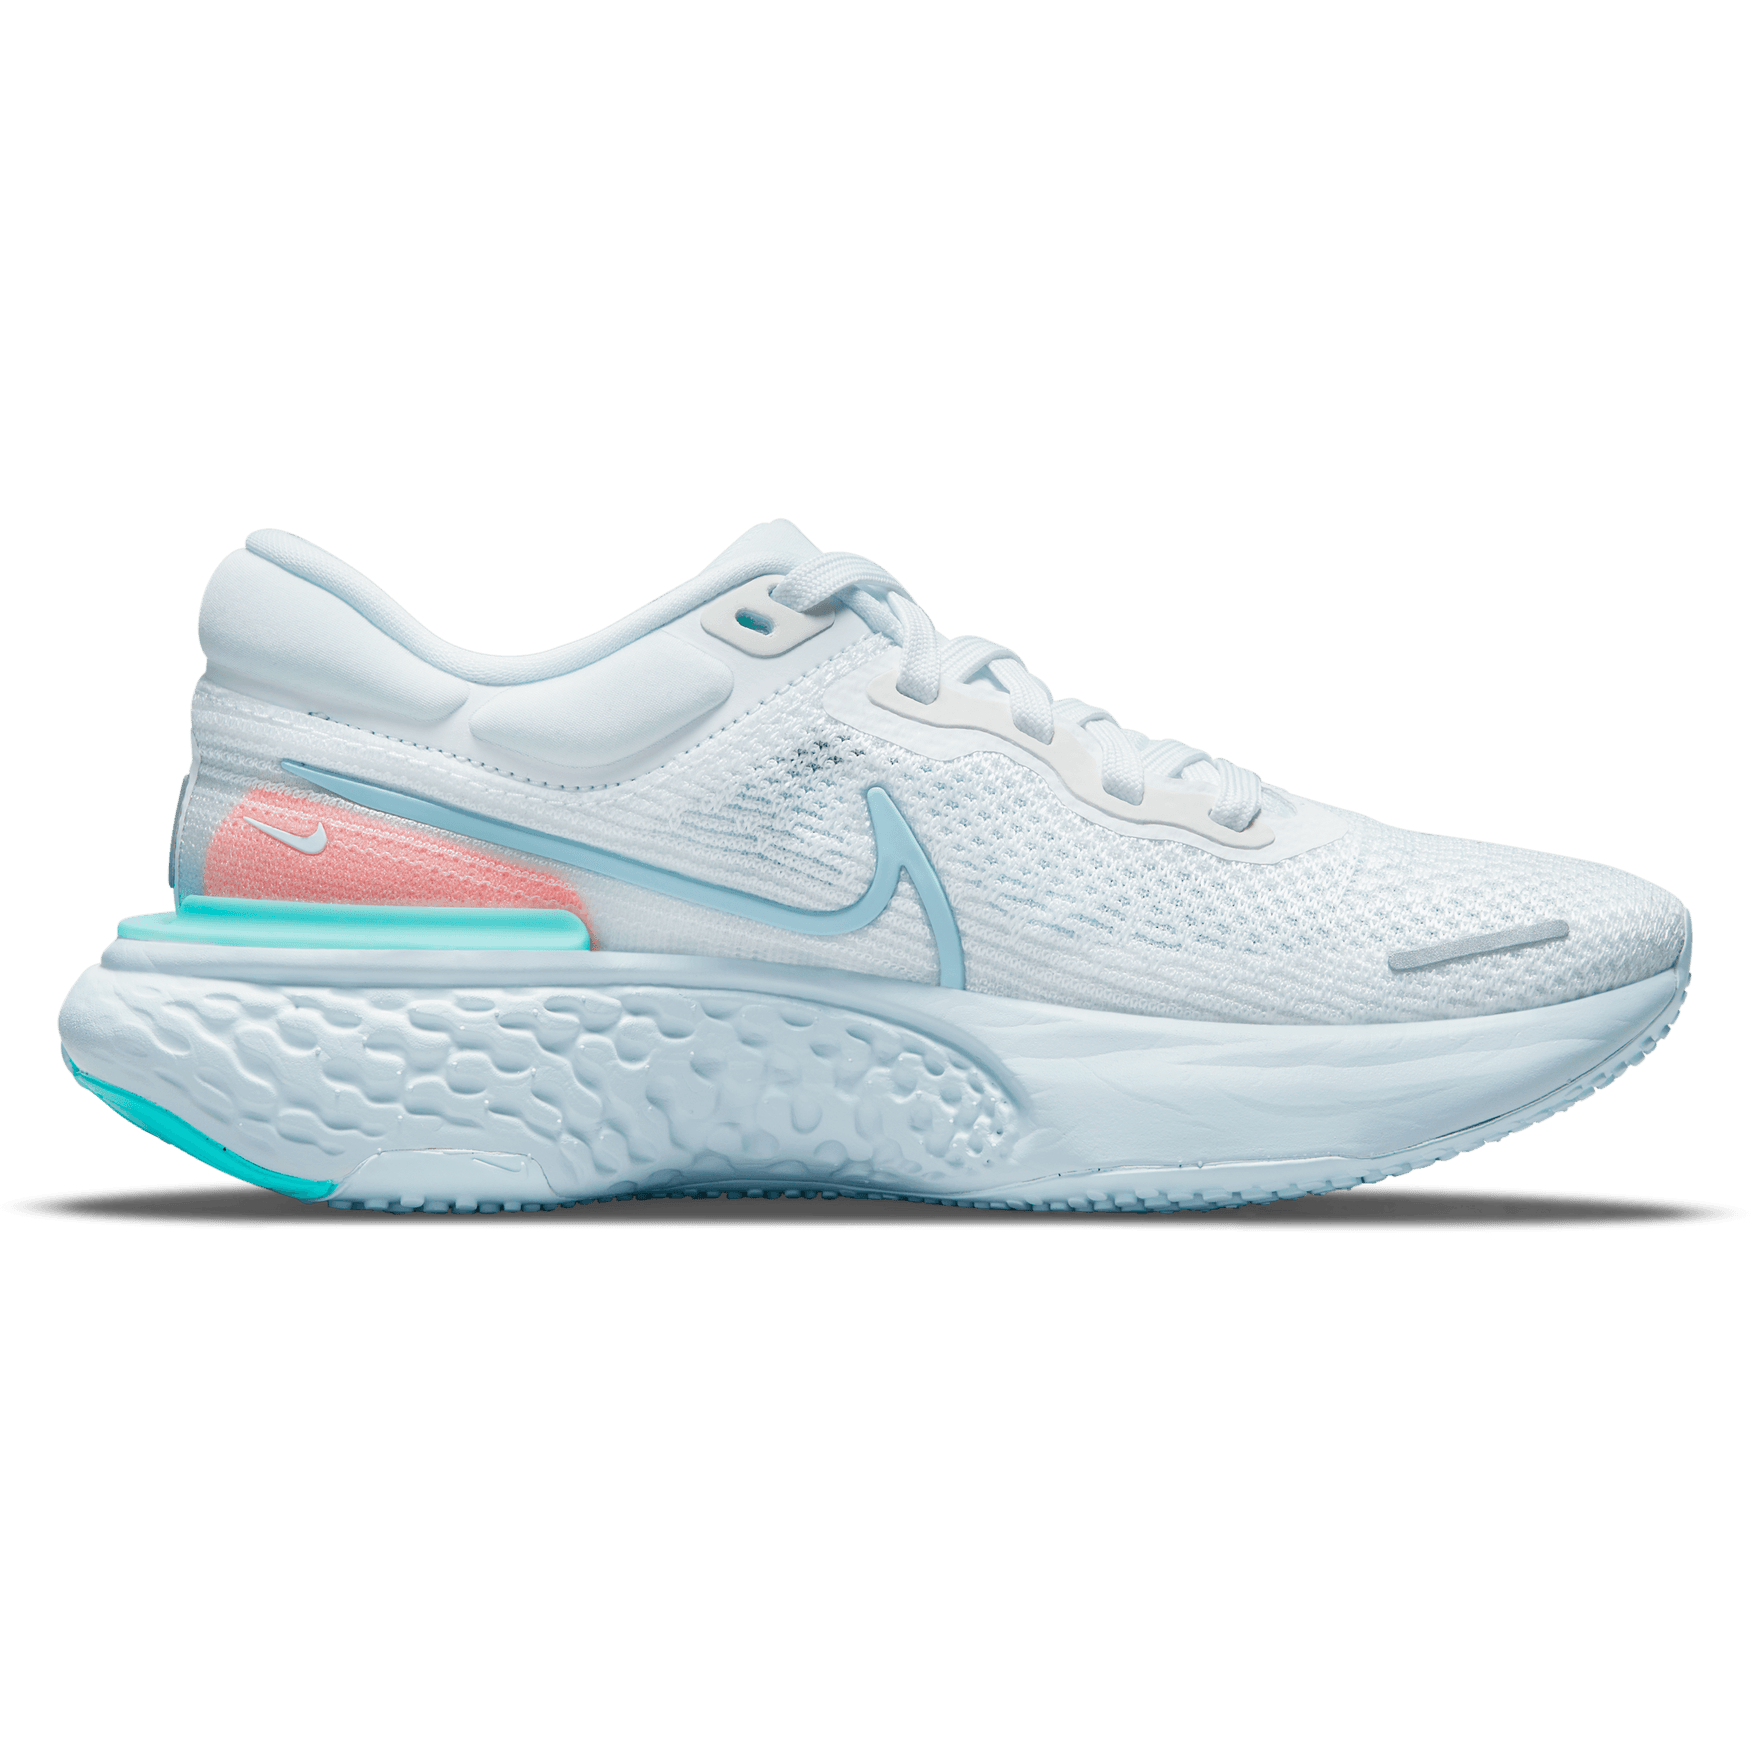 Nike-Women's Nike ZoomX Invincible Run Flyknit-White/Hydrogen Blue/Dynamic Turquoise-Pacers Running